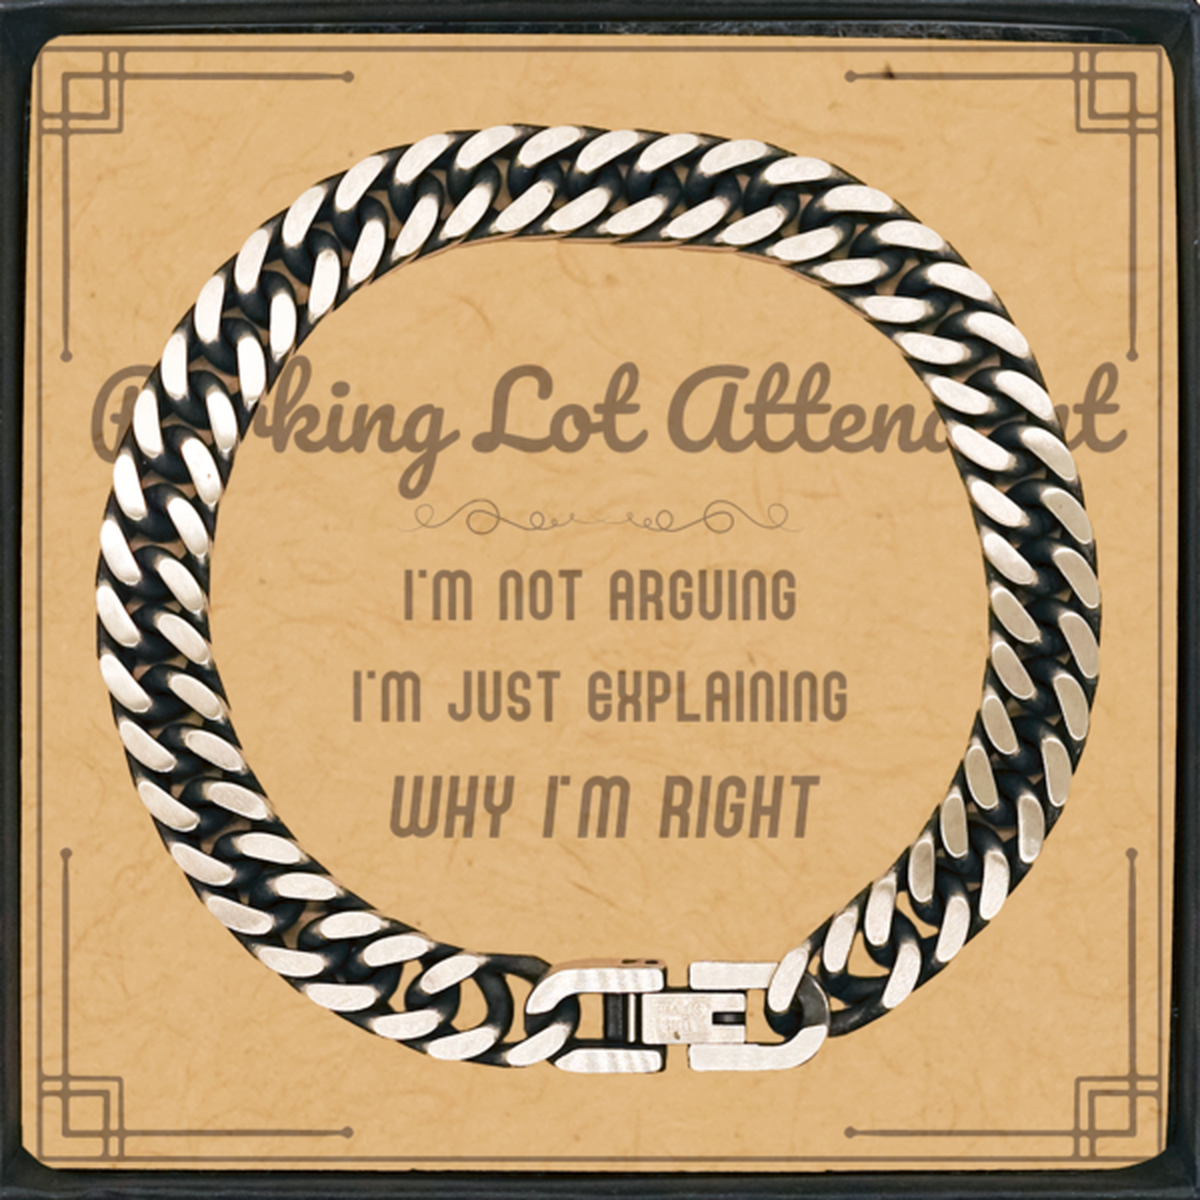 Parking Lot Attendant I'm not Arguing. I'm Just Explaining Why I'm RIGHT Cuban Link Chain Bracelet, Funny Saying Quote Parking Lot Attendant Gifts For Parking Lot Attendant Message Card Graduation Birthday Christmas Gifts for Men Women Coworker